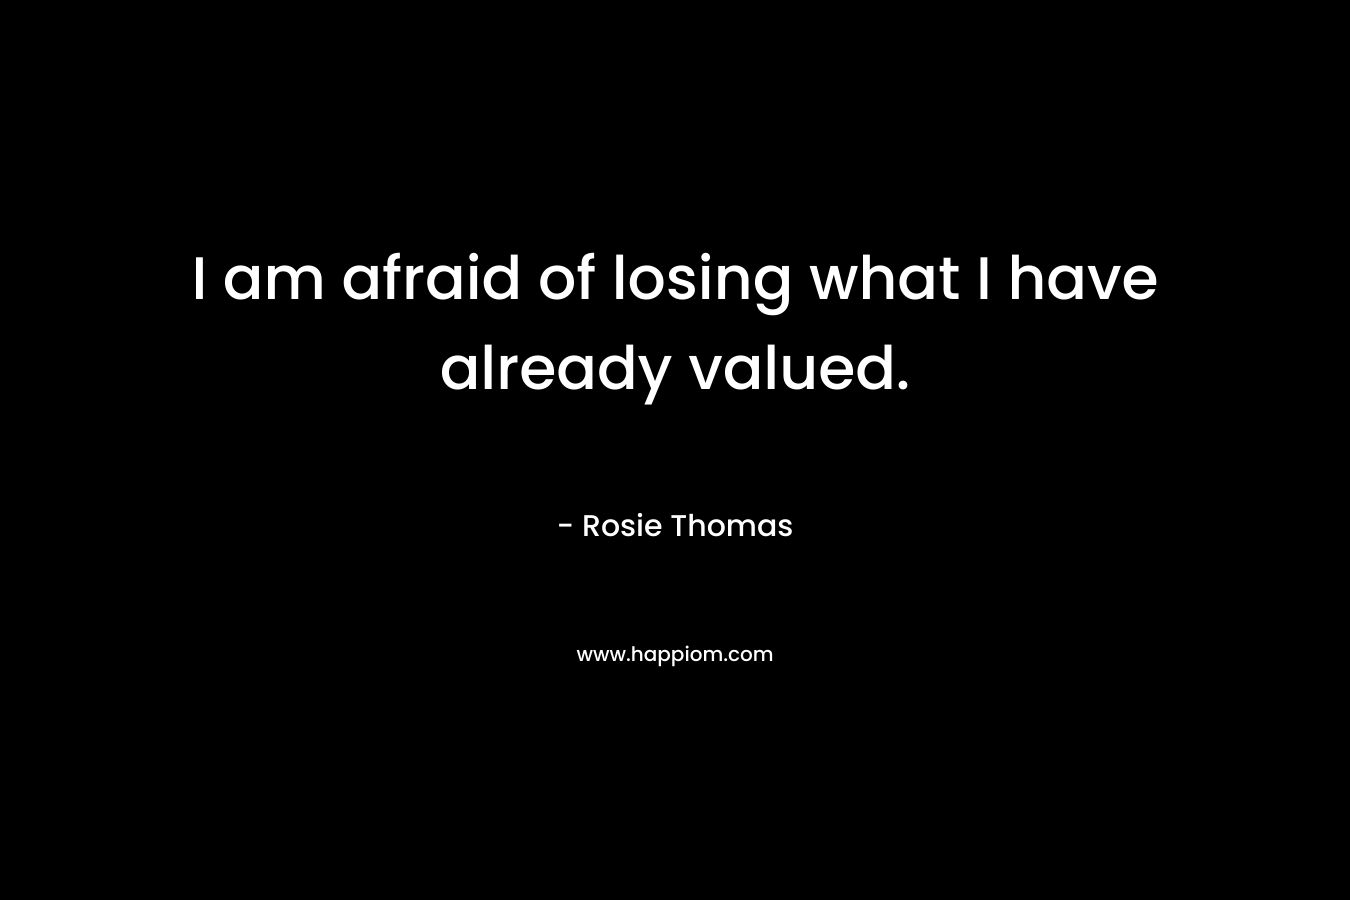 I am afraid of losing what I have already valued.